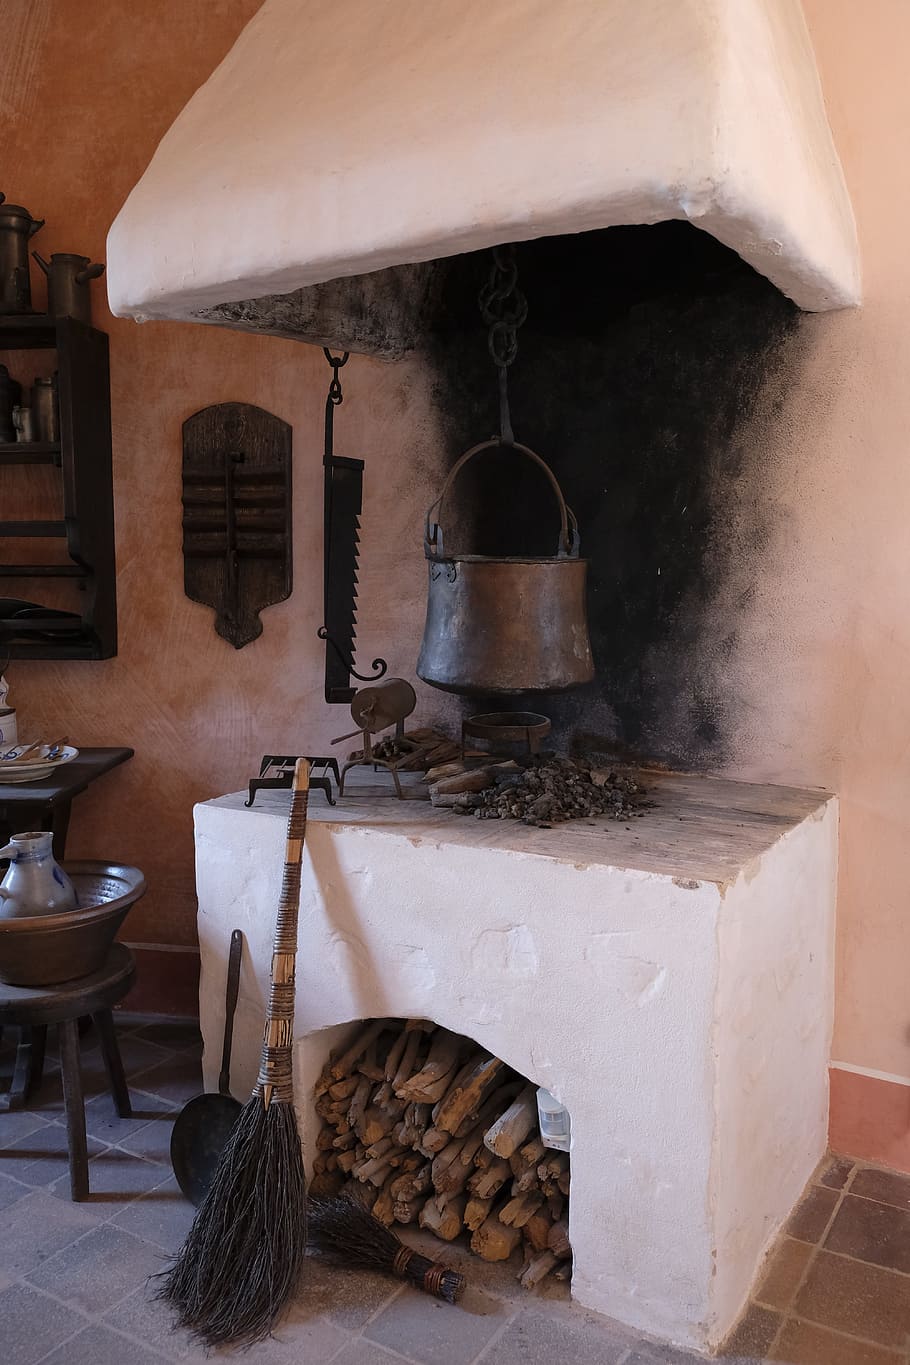 cook, cooking zone, fireplace, oven, boiler, pot, old, antique, HD wallpaper